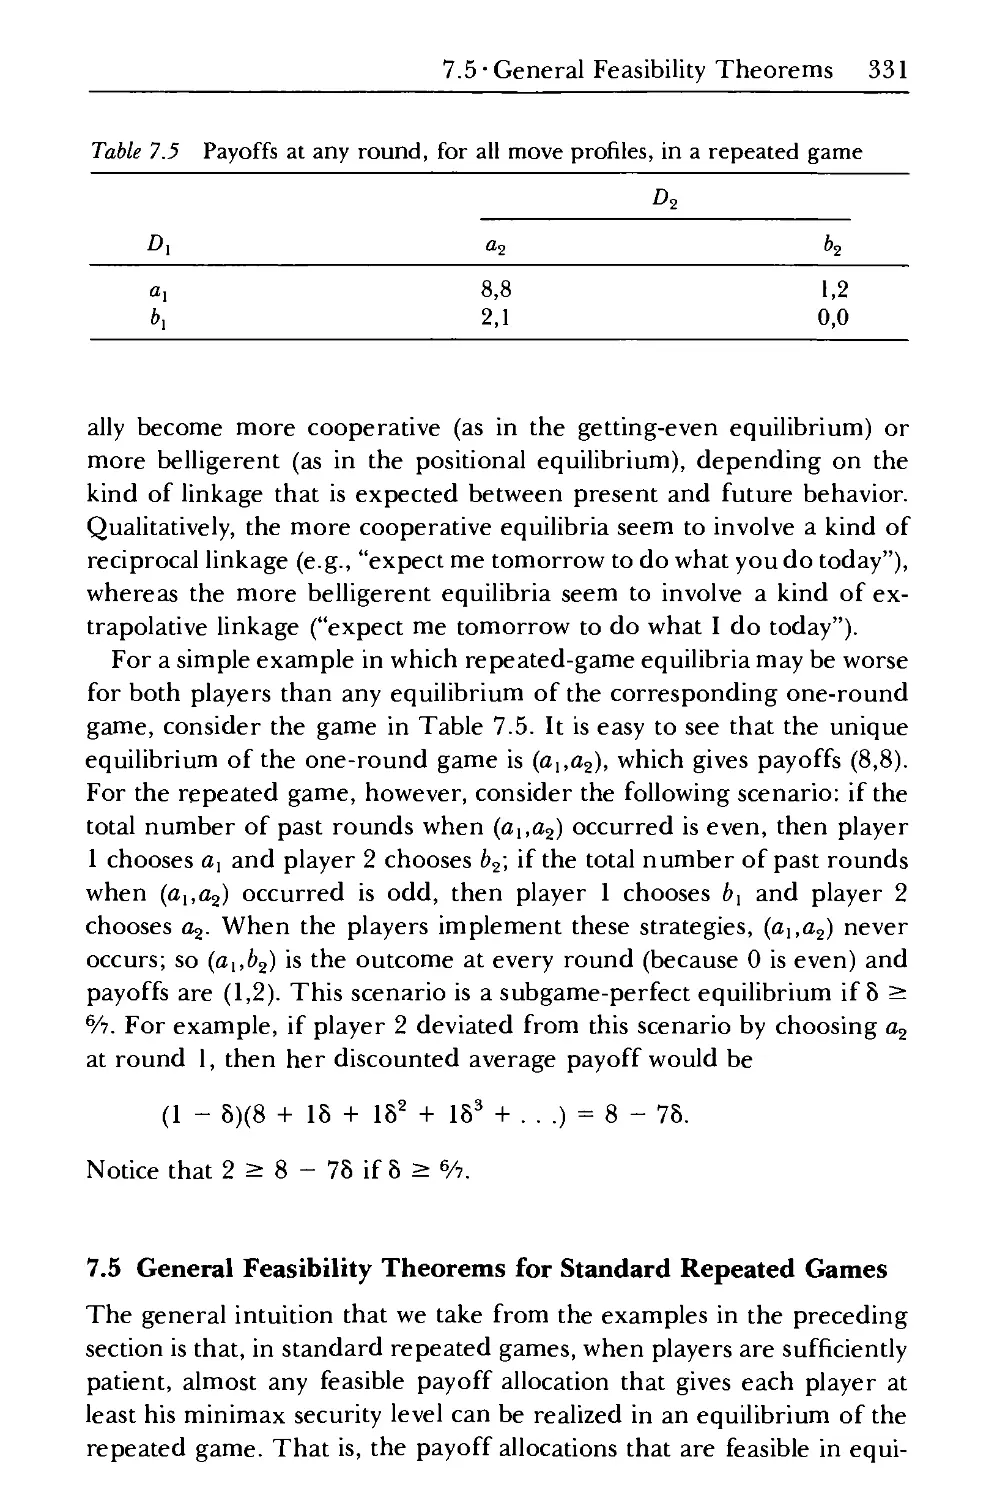 7.5 General Feasibility Theorems for Standard Repeated Games